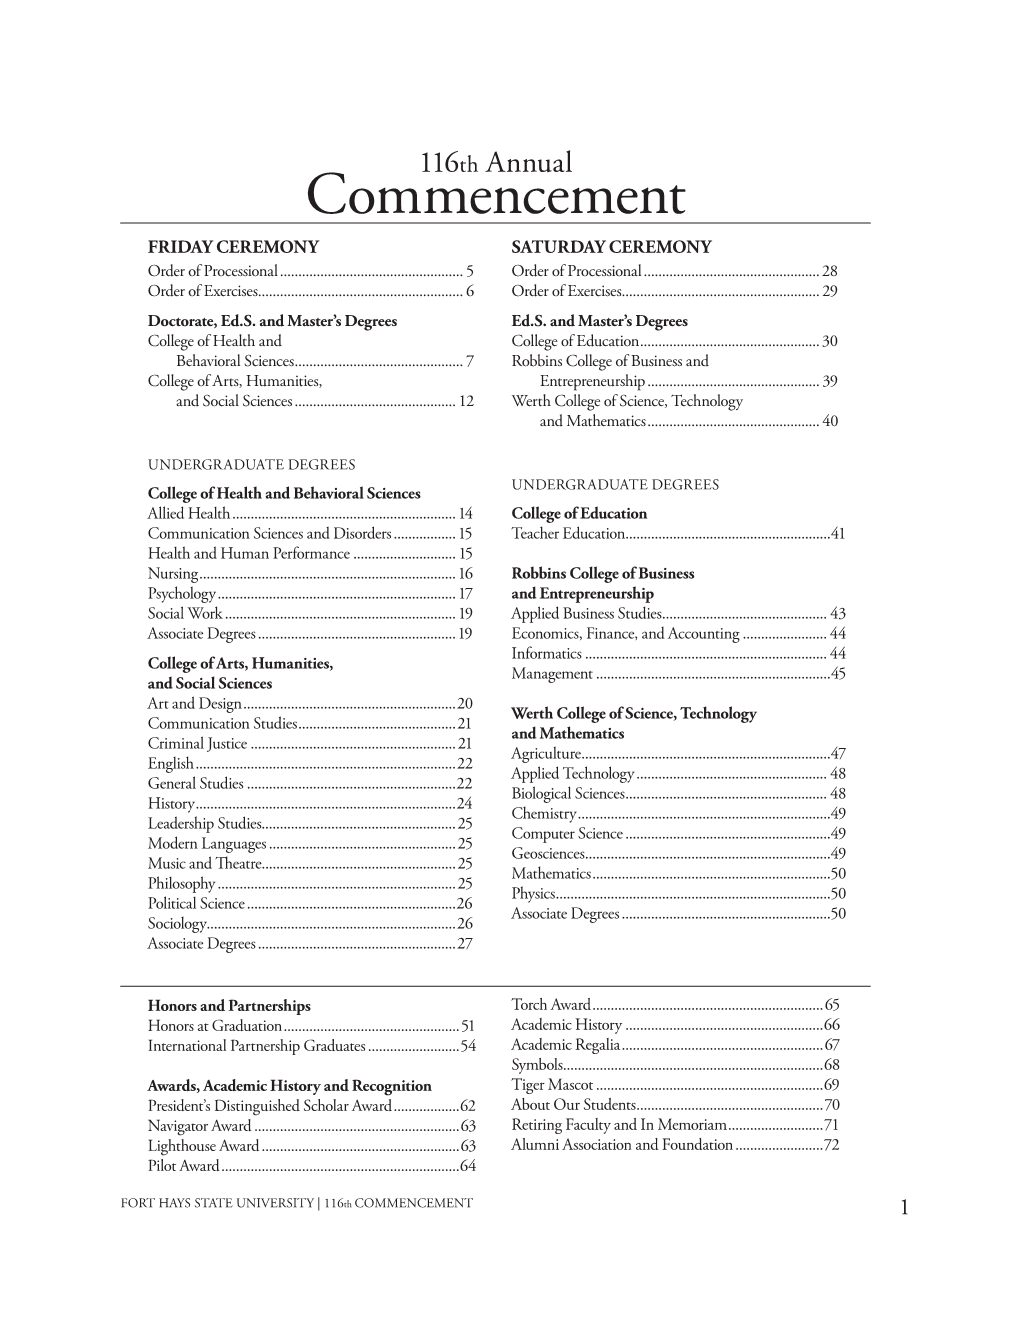 Commencement FRIDAY CEREMONY SATURDAY CEREMONY Order of Processional